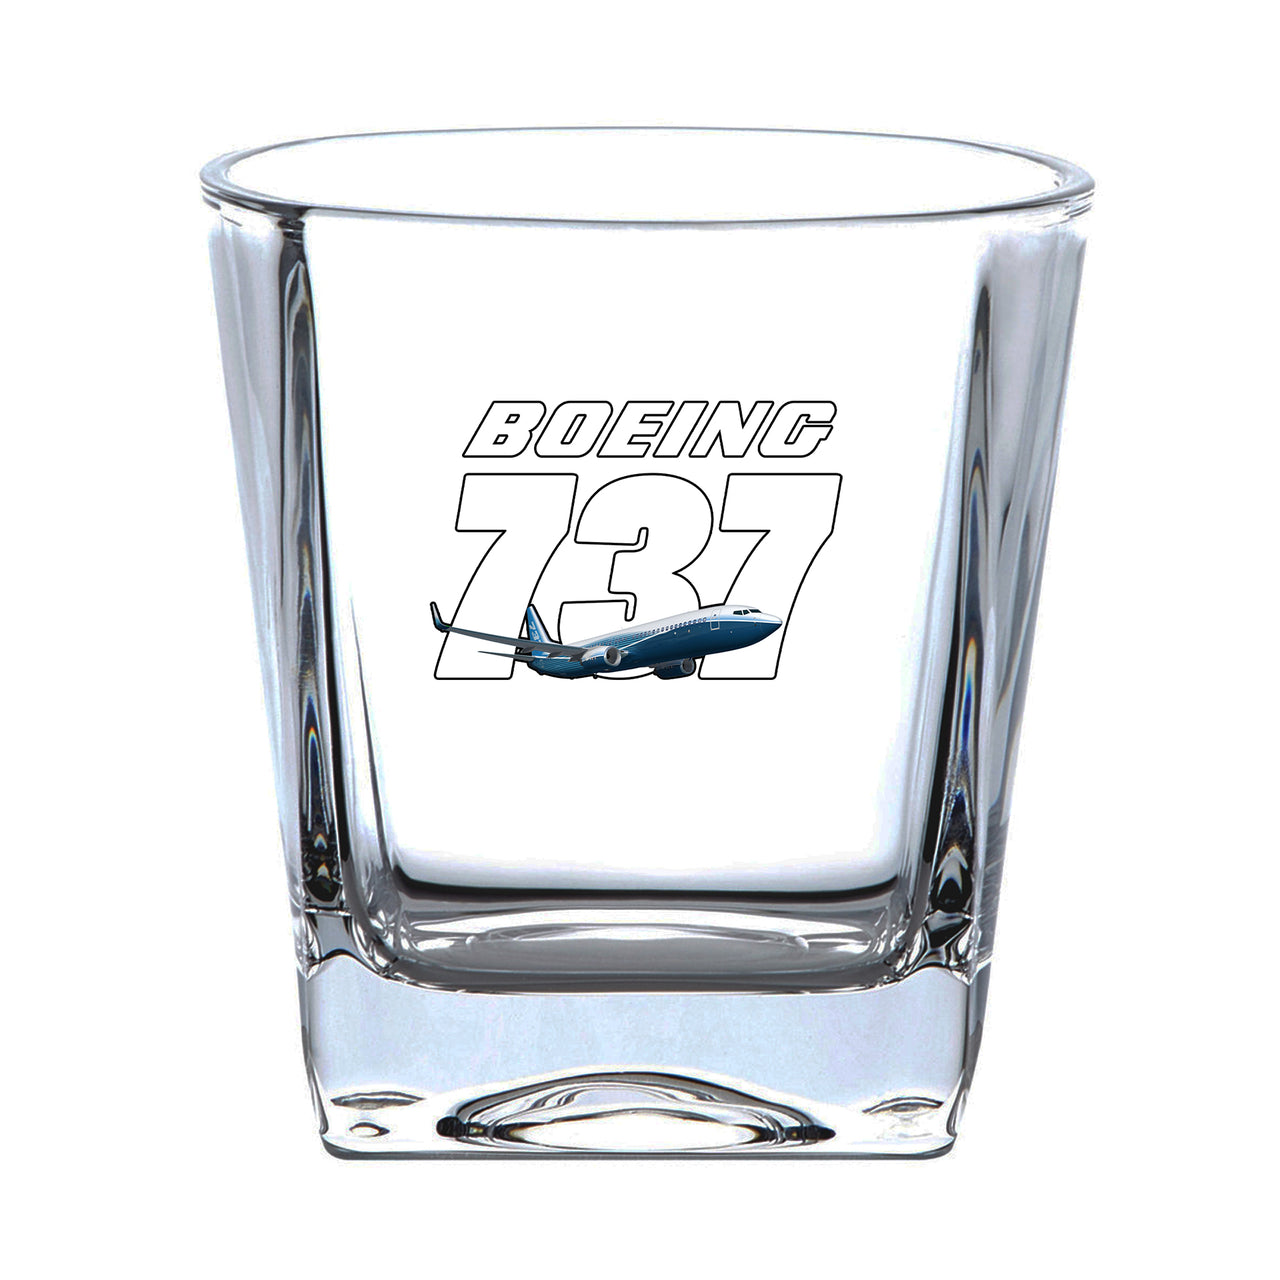 Super Boeing 737+Text Designed Whiskey Glass